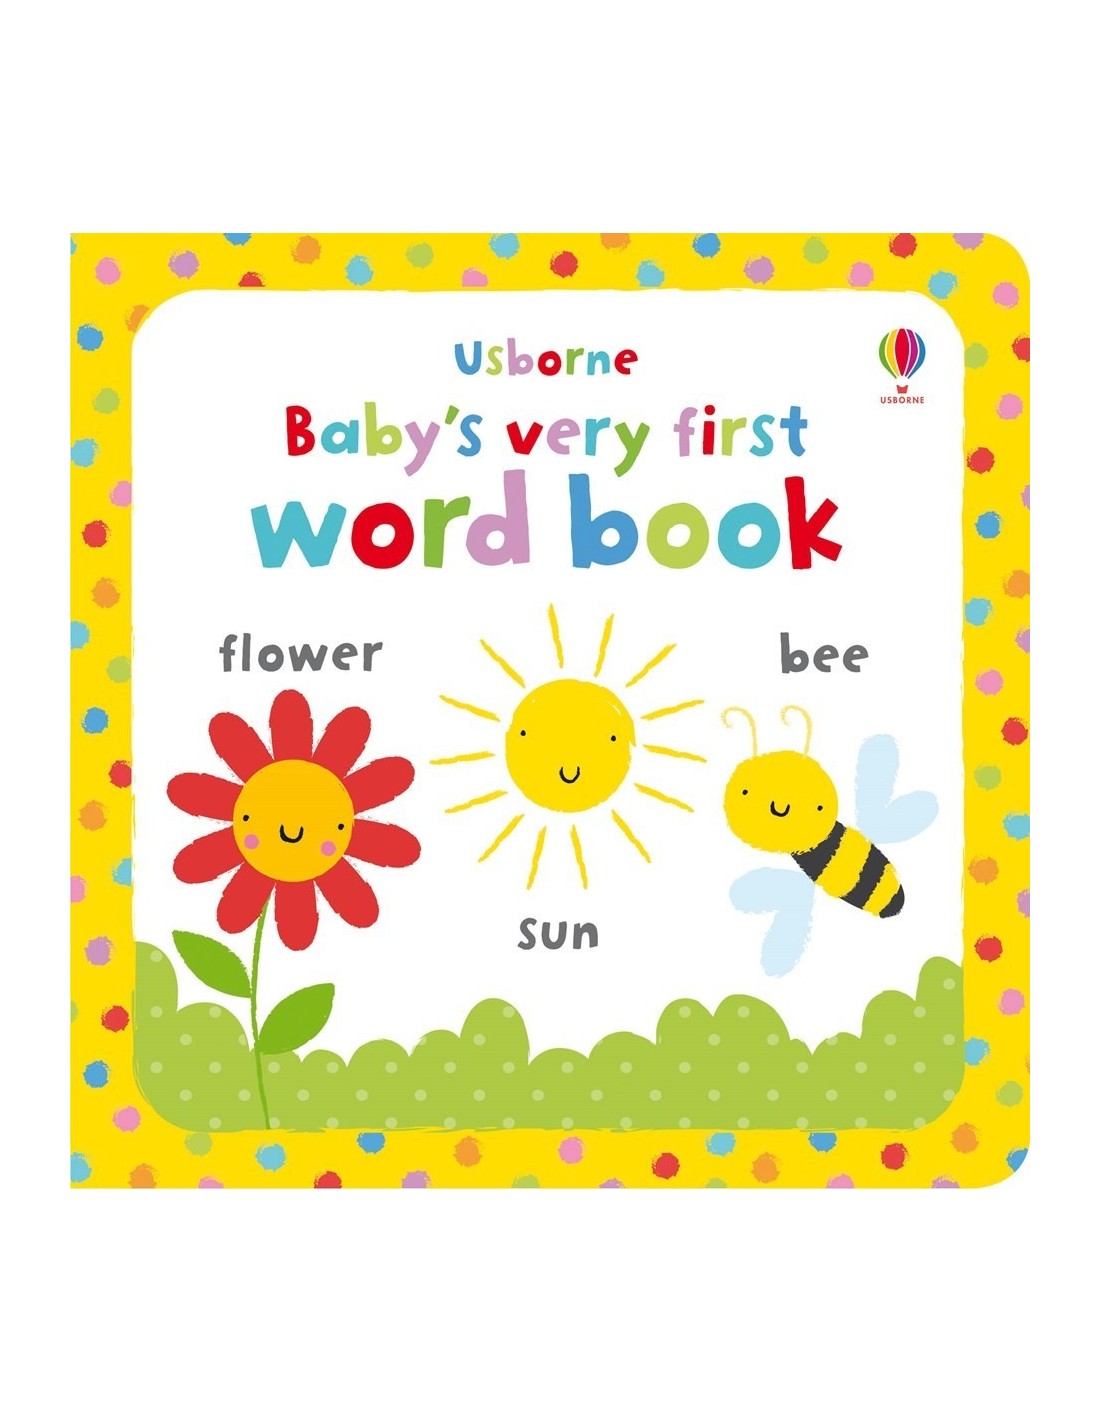 Baby's very first word book